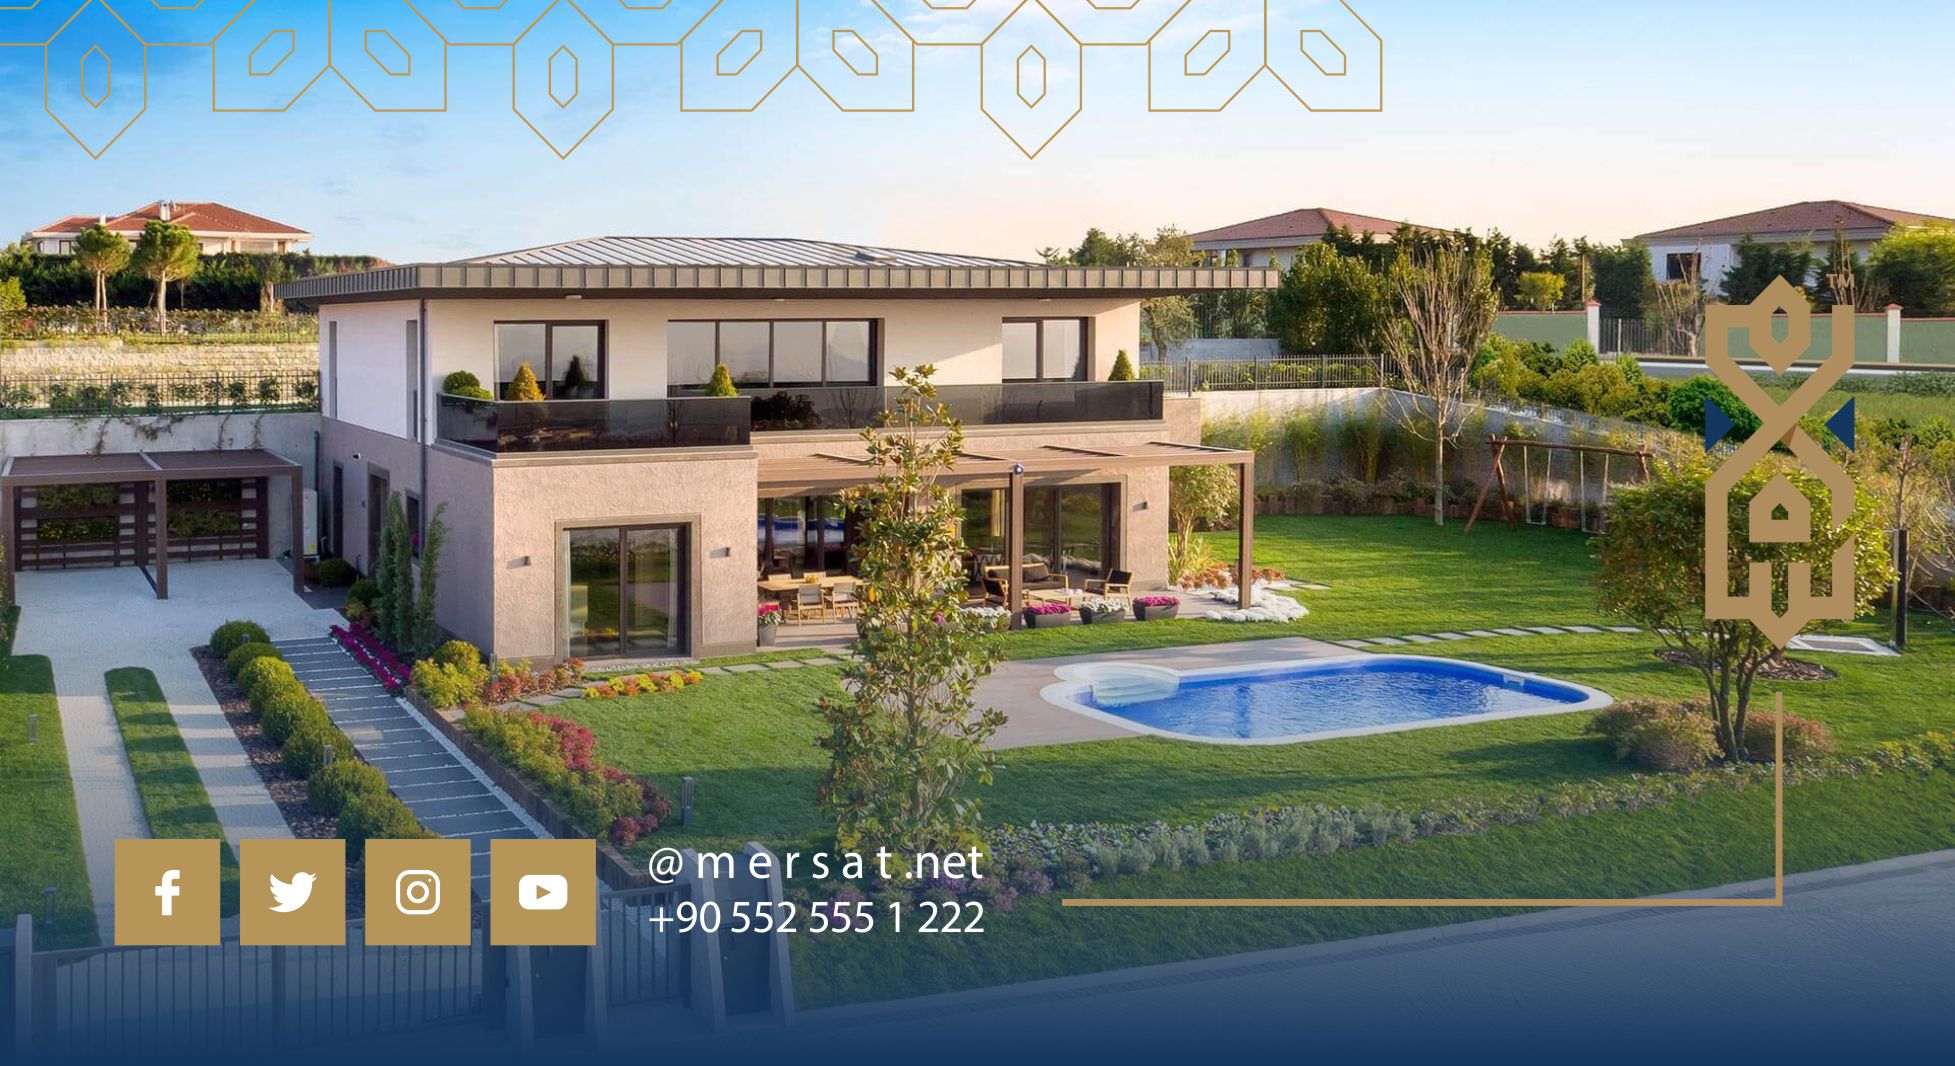 Choose from Turkey villas what suits you